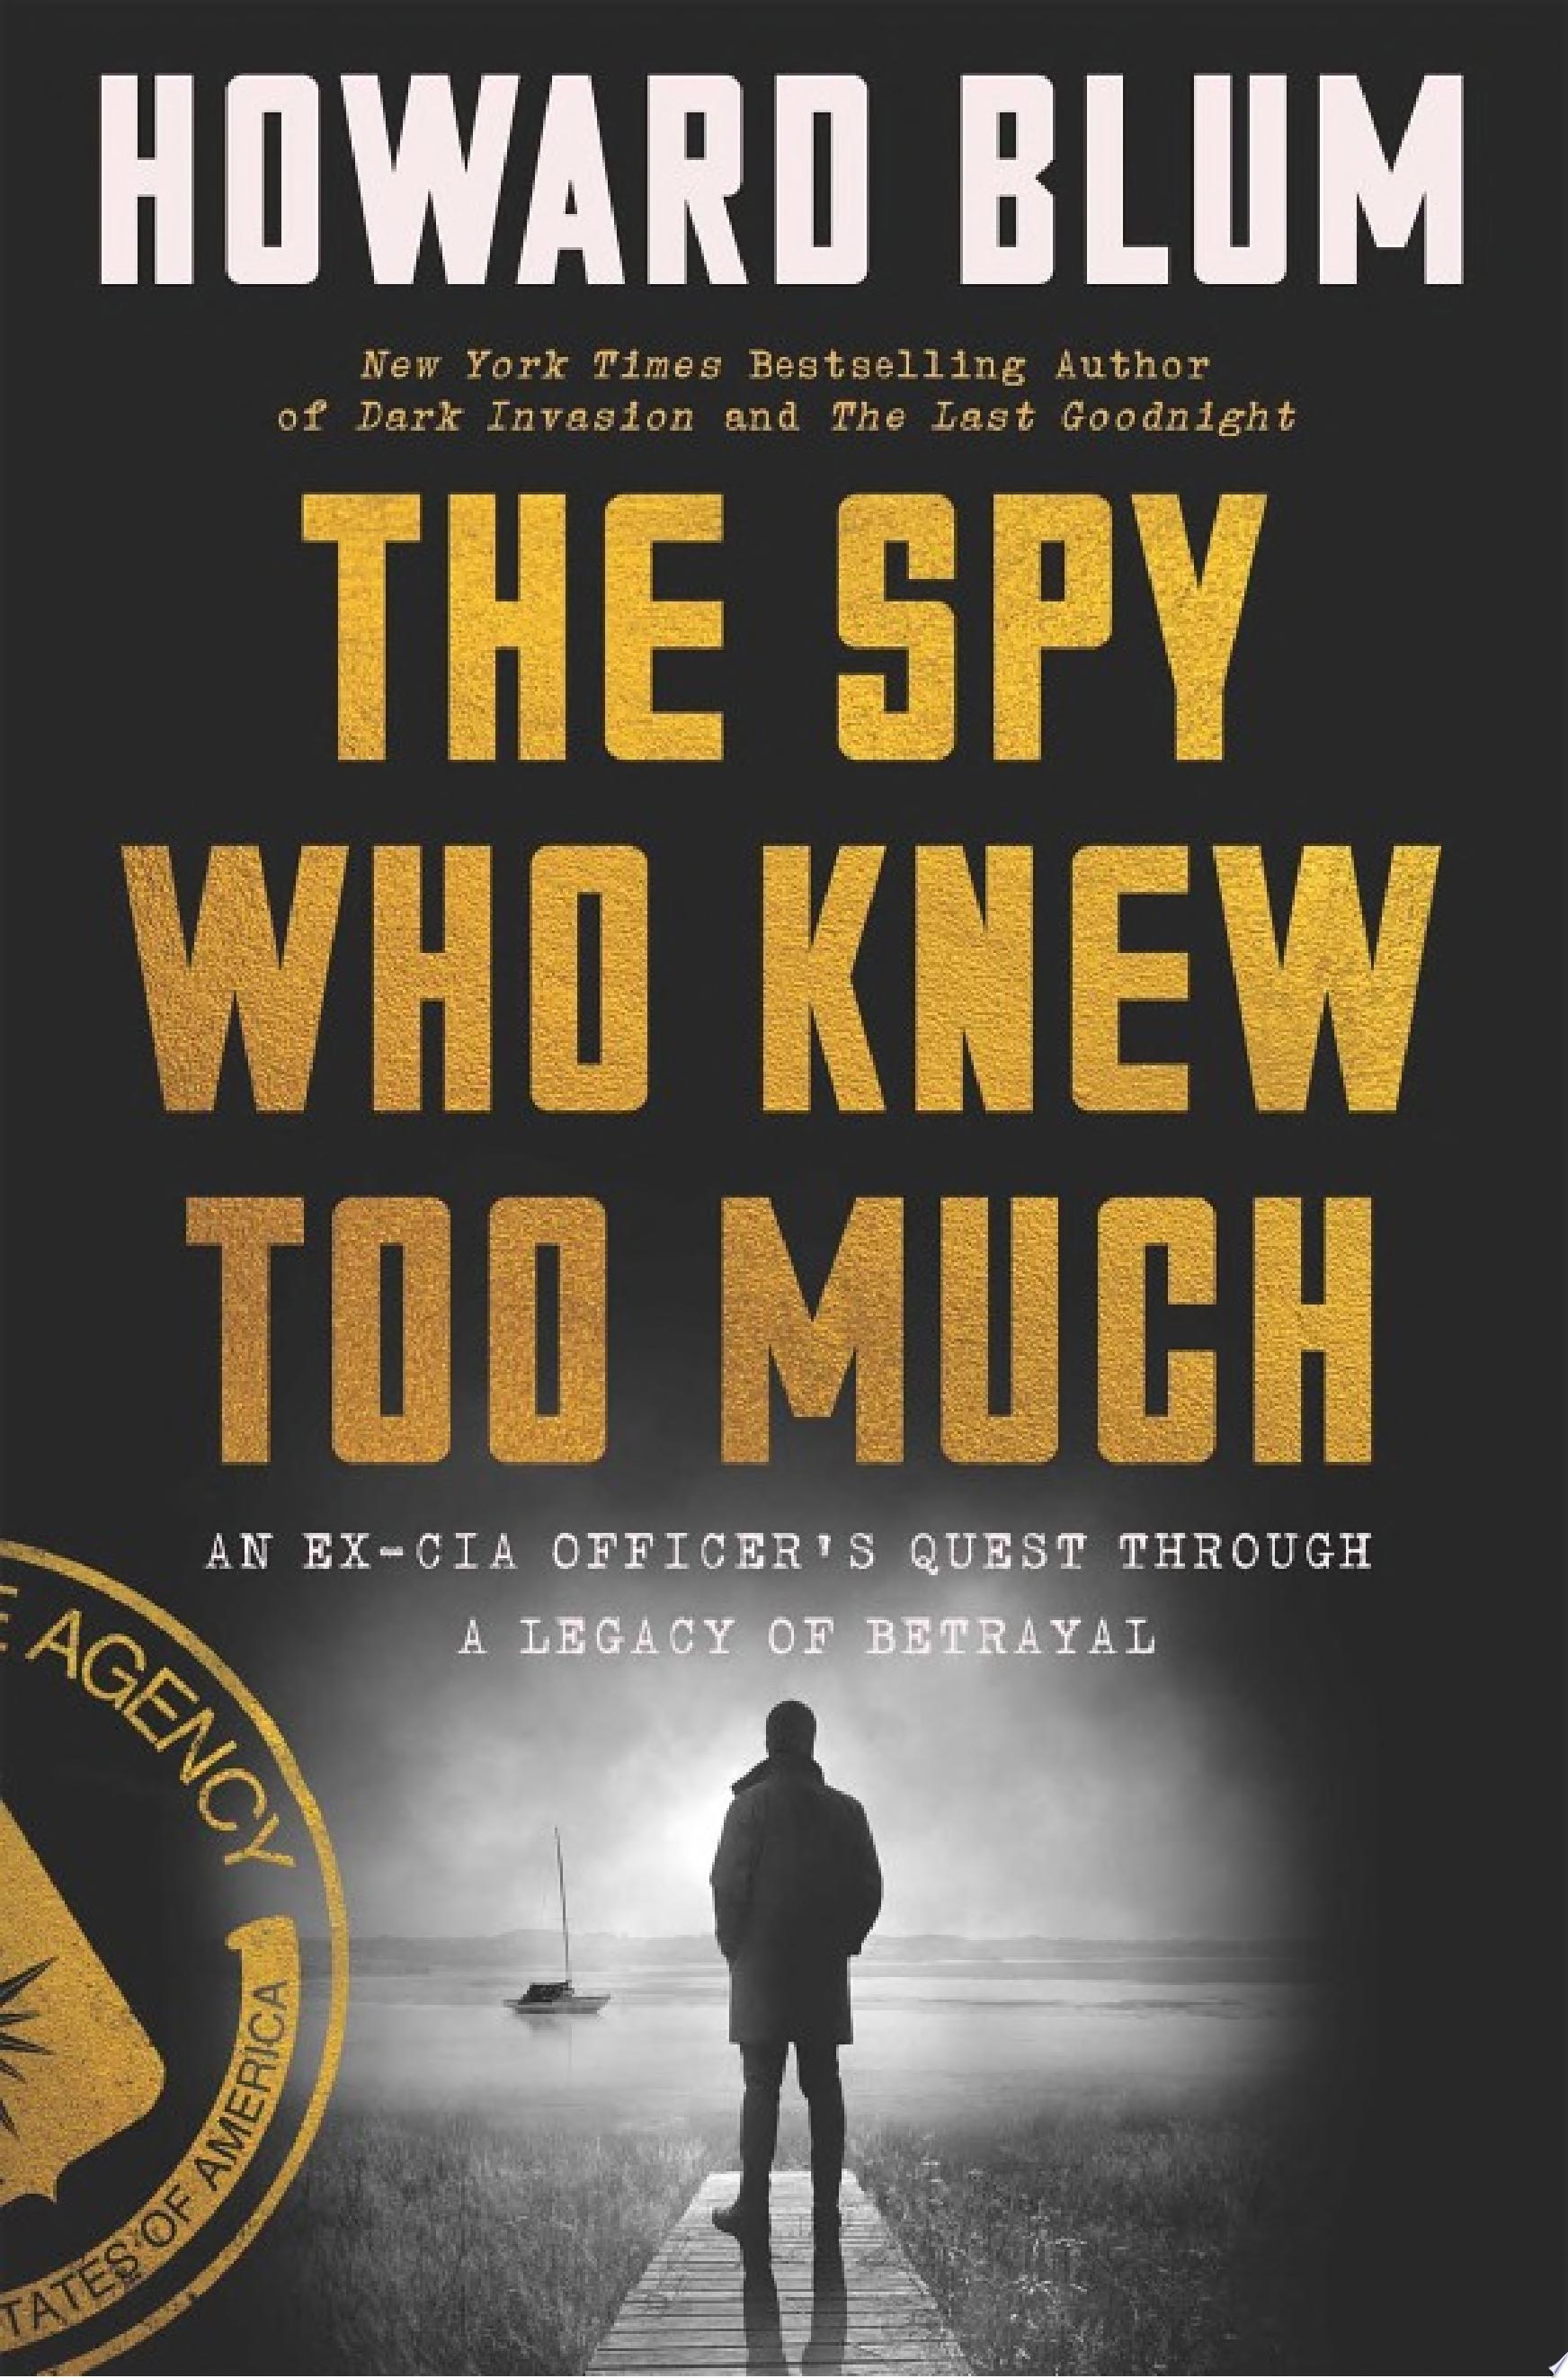 Image for "The Spy Who Knew Too Much"